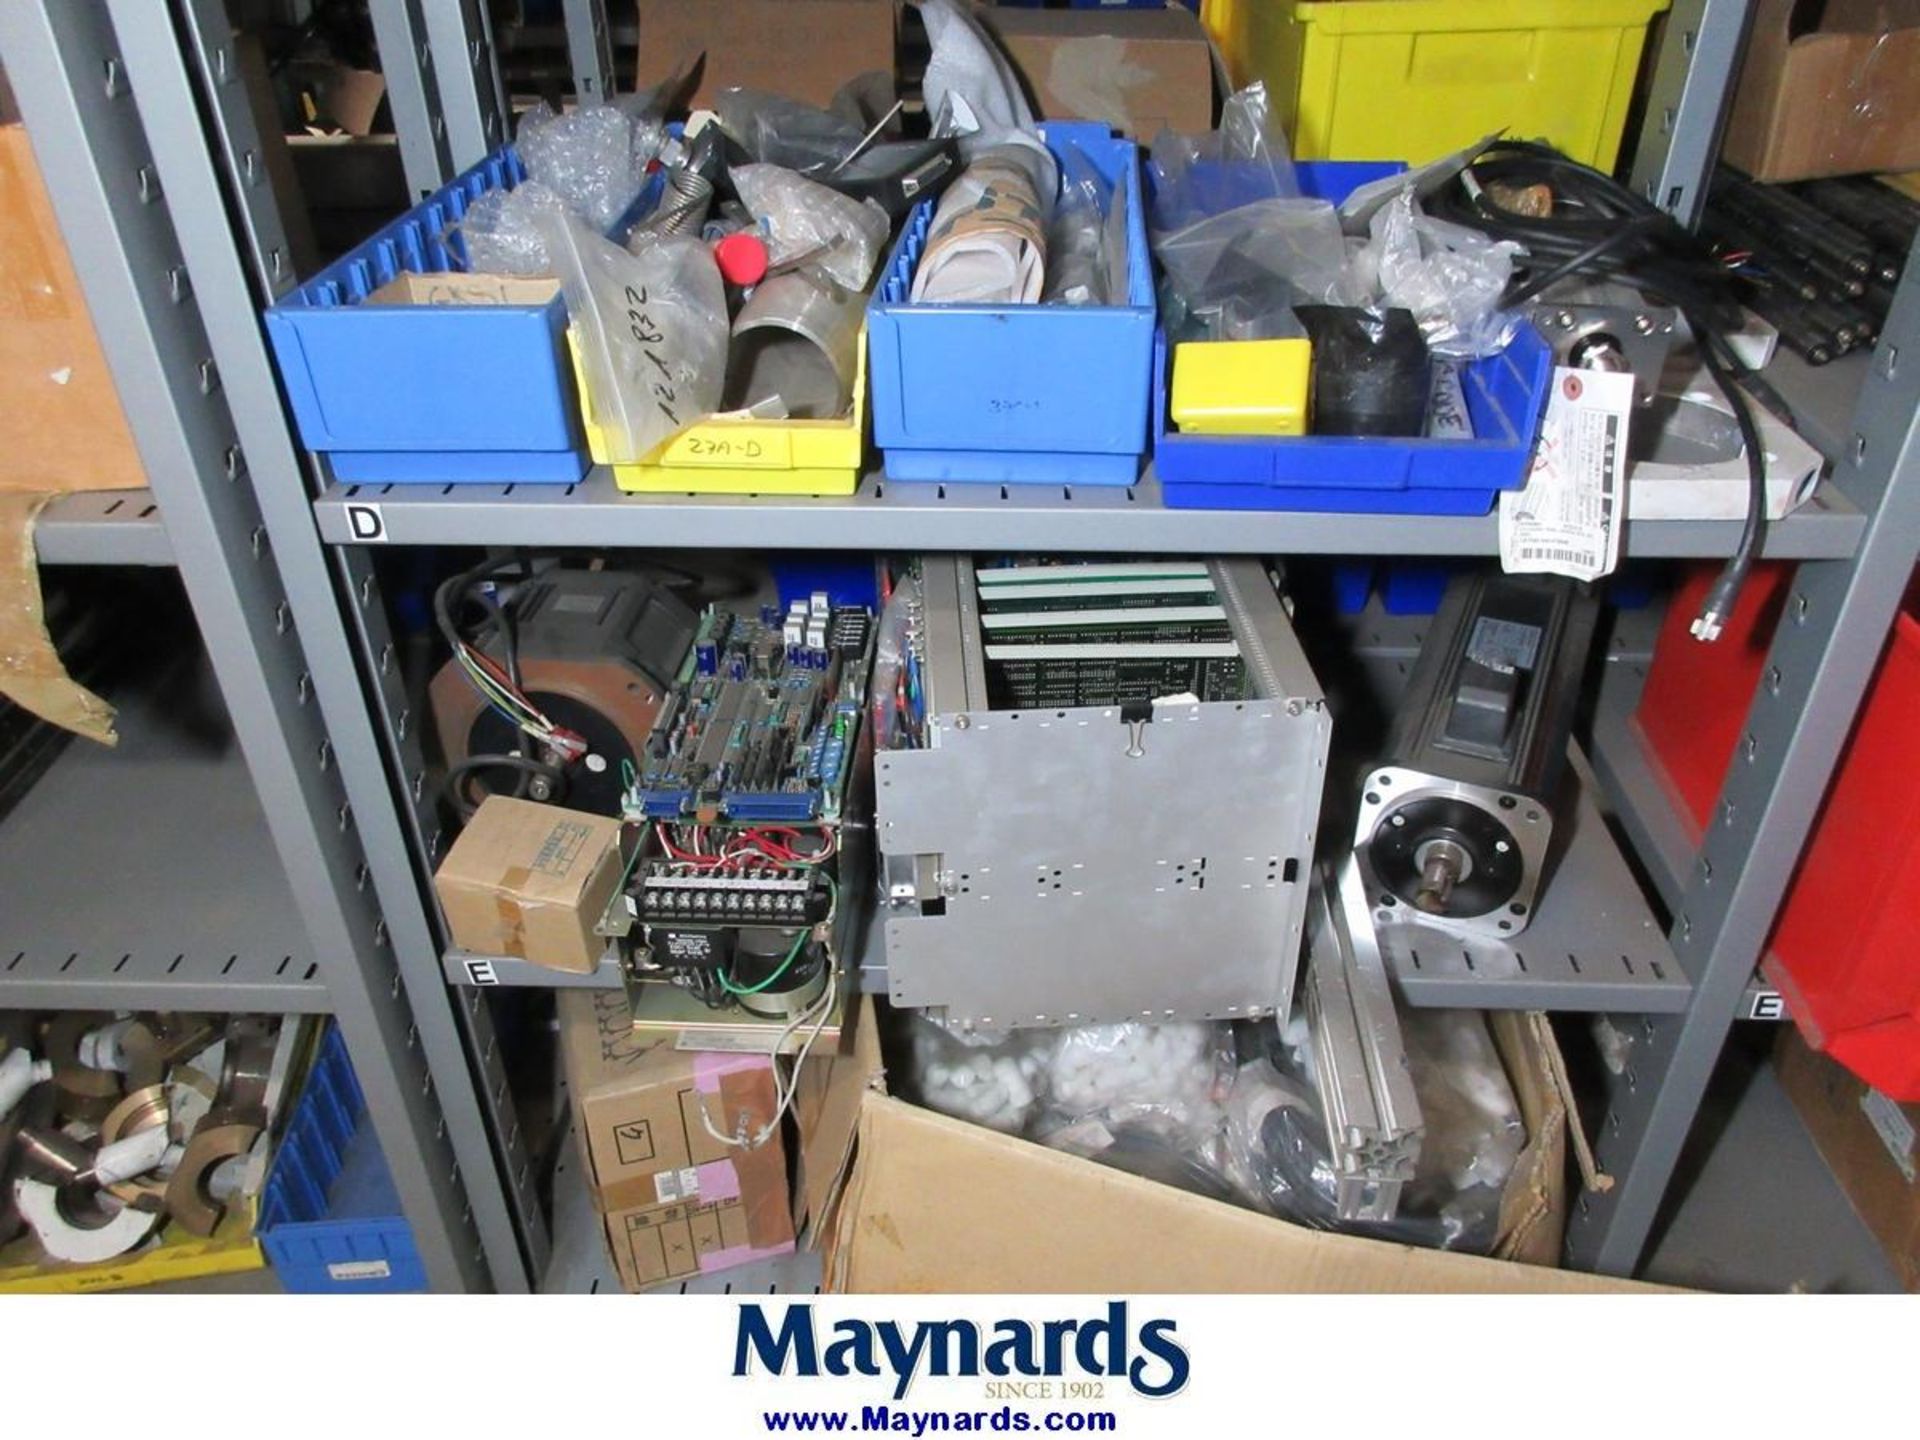 Large Lot of Electrical Controls, PLC's, Drives & Remaining Contents of Maint. Parts Crib - Image 19 of 107